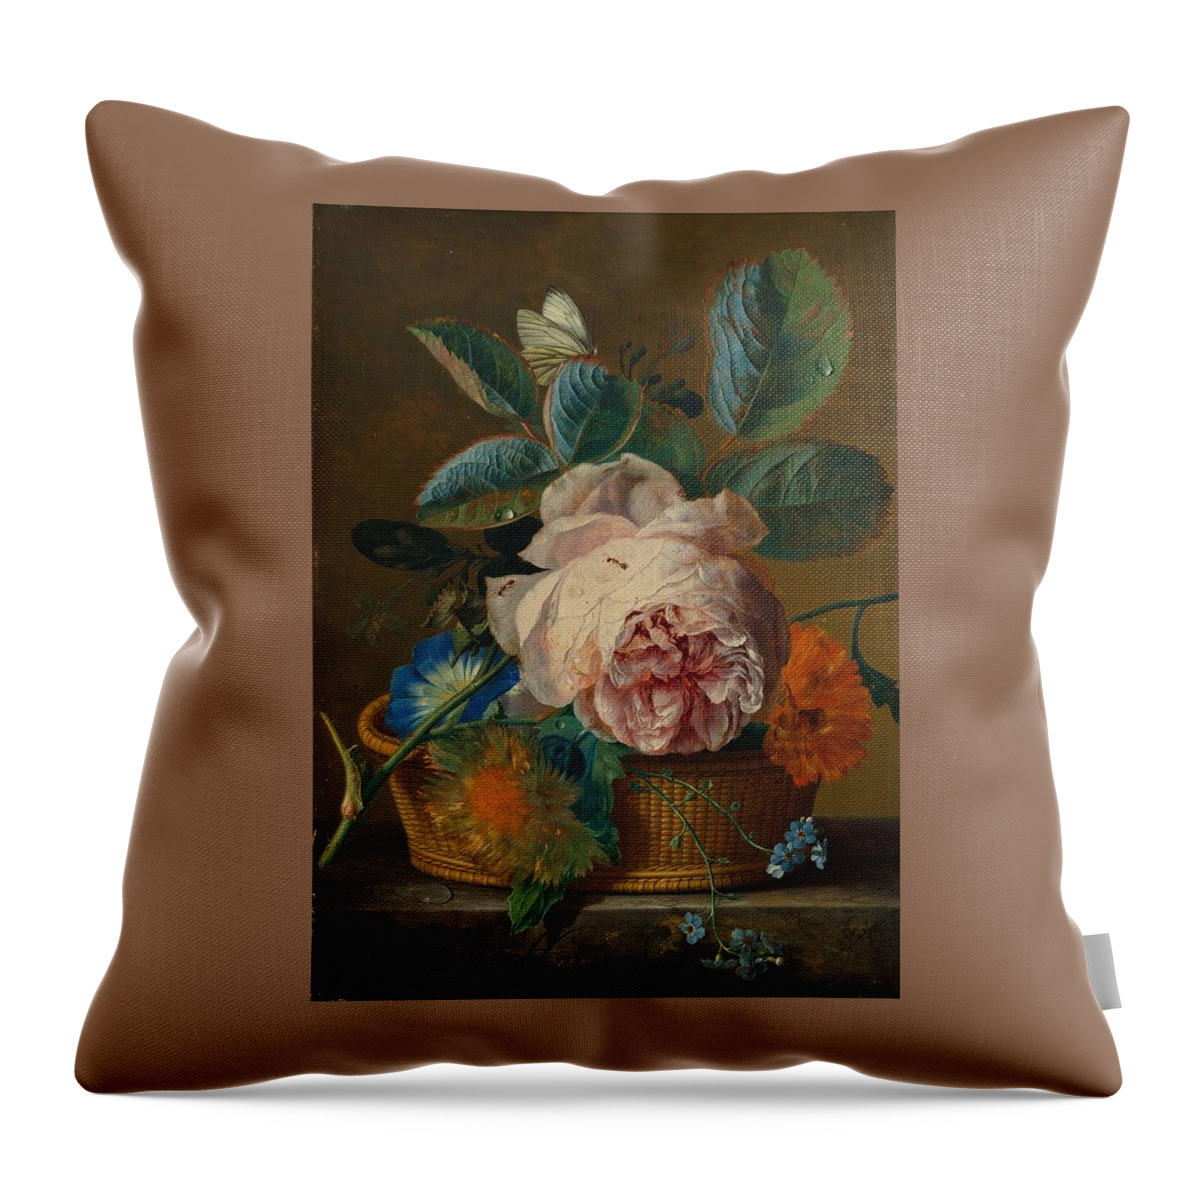 Basket With Flowers Throw Pillow featuring the painting Basket with flowers by Jan van Huysums